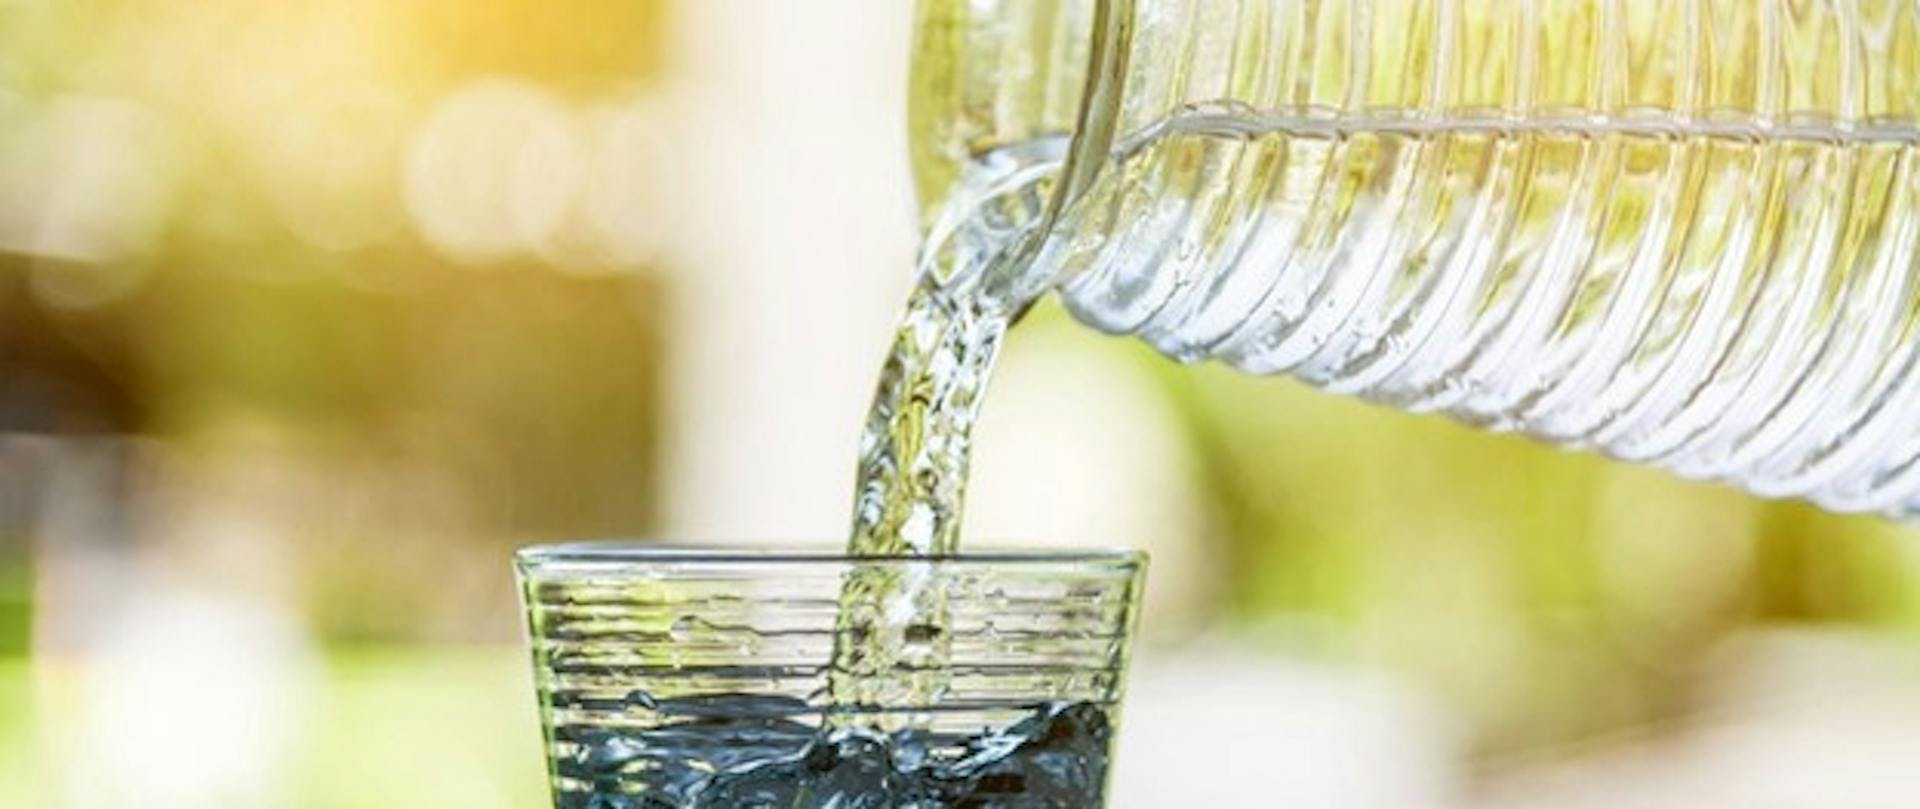 Is Alkaline Water Good for You? Get the Facts